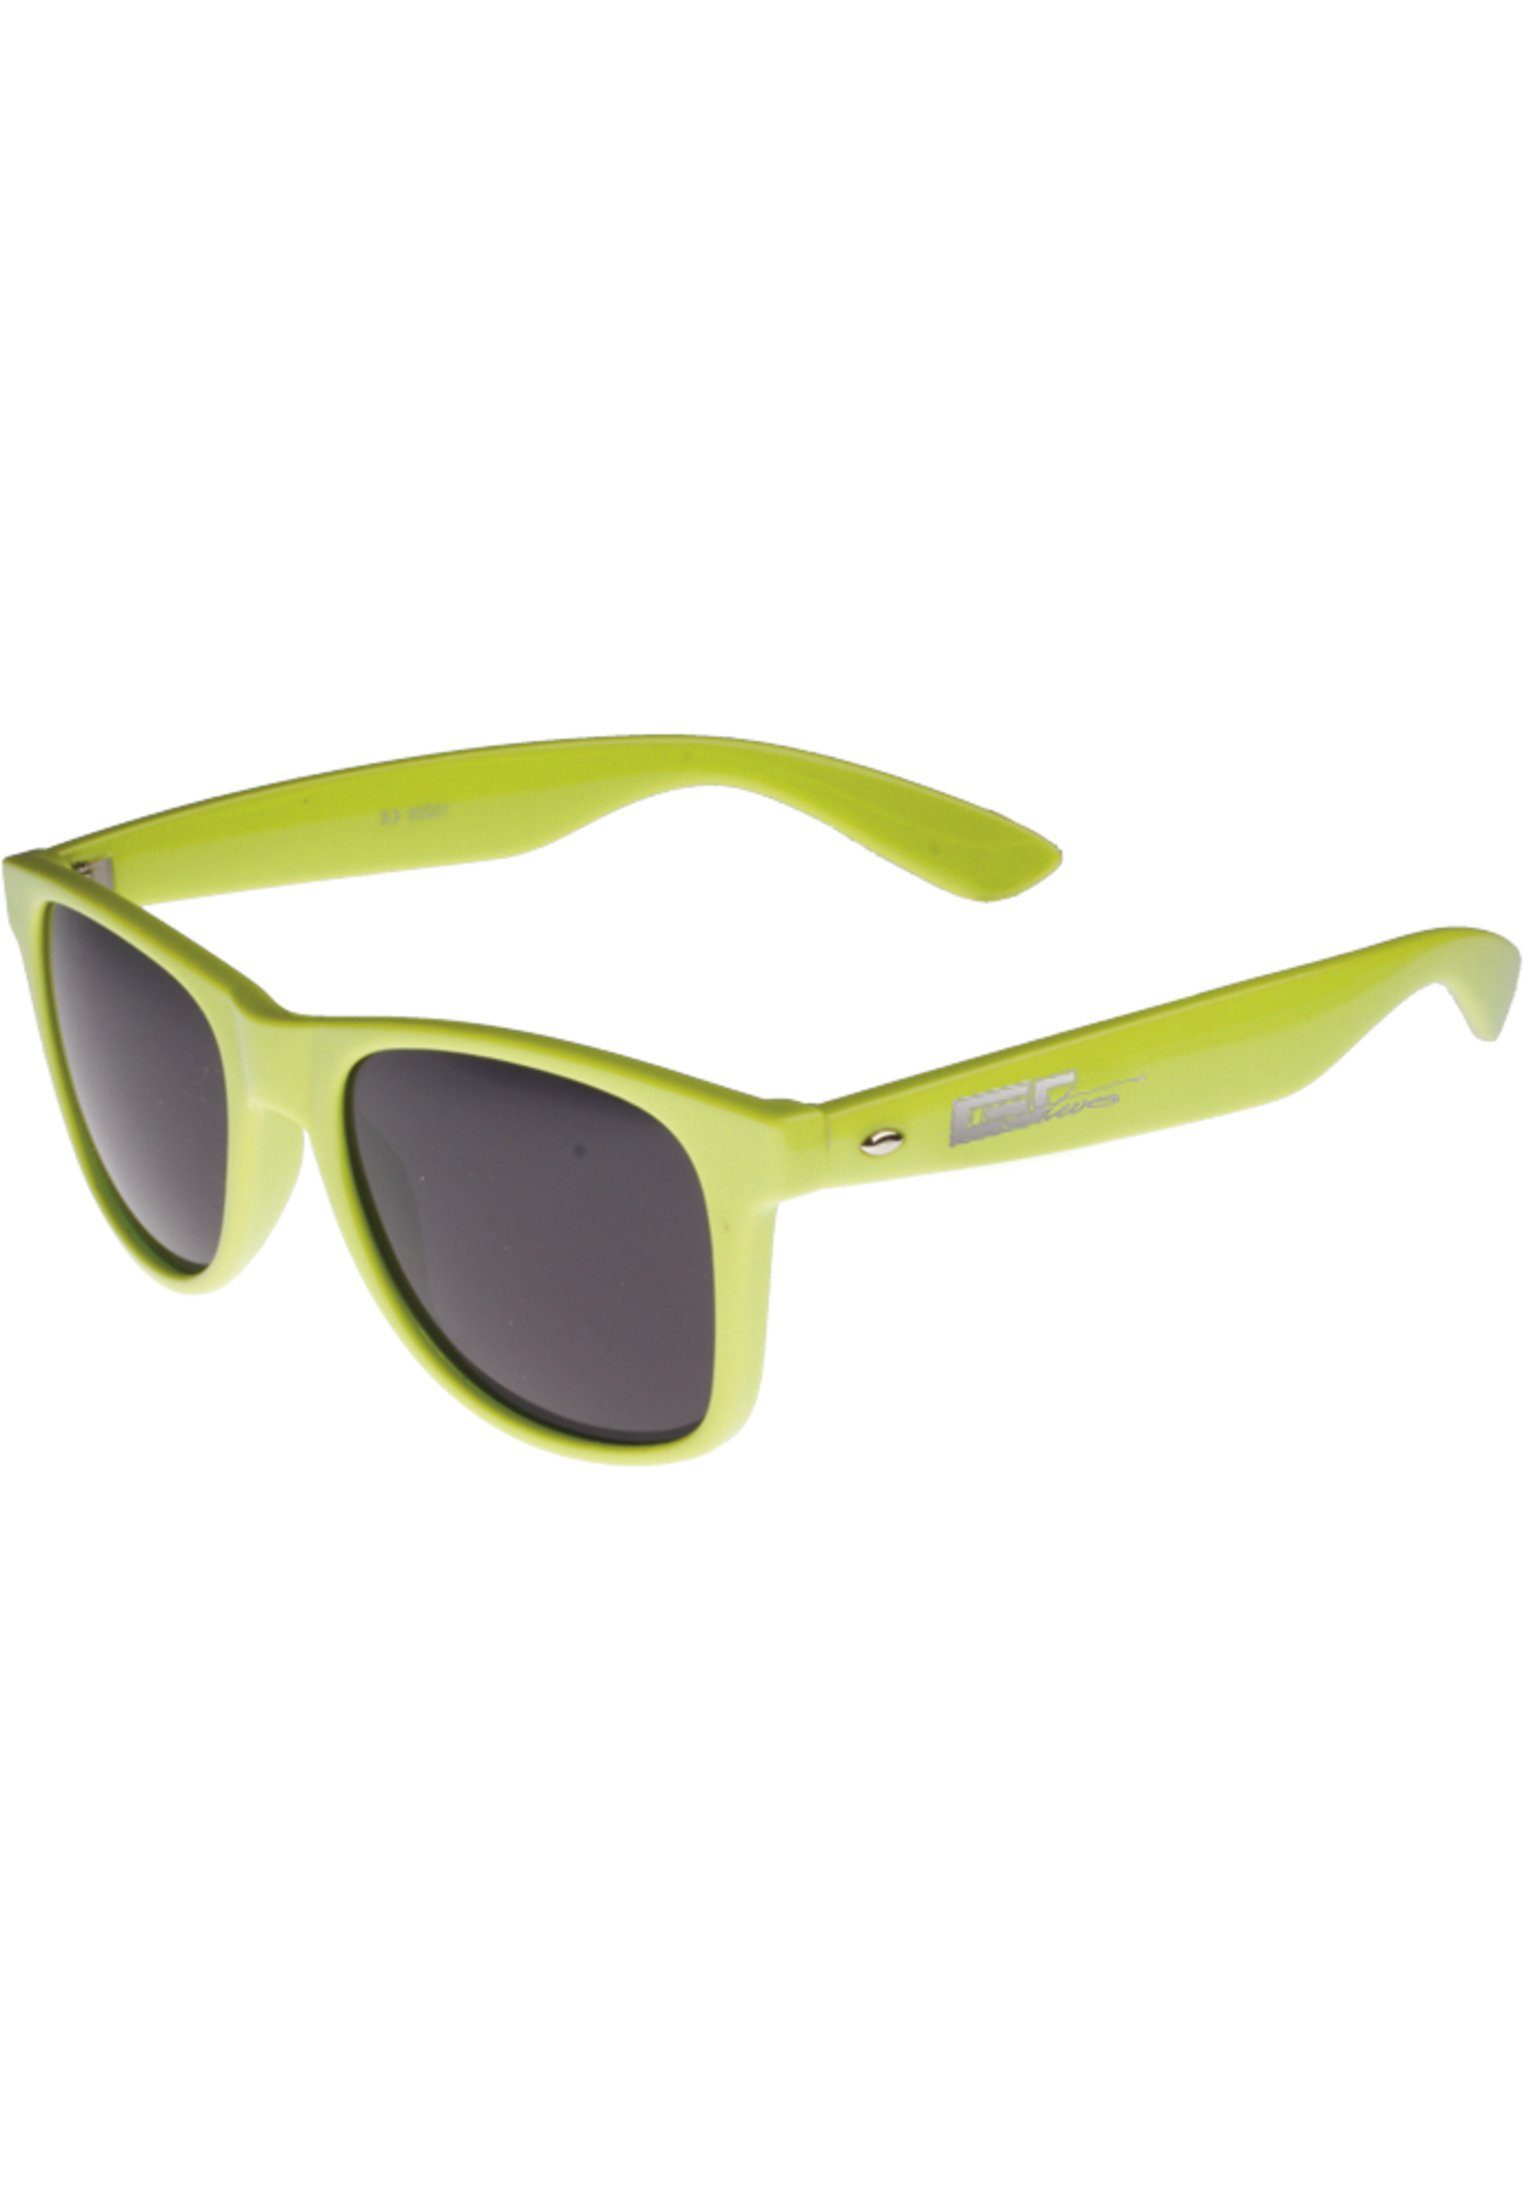 Sonnenbrille Groove MSTRDS Accessoires neongreen GStwo Shades